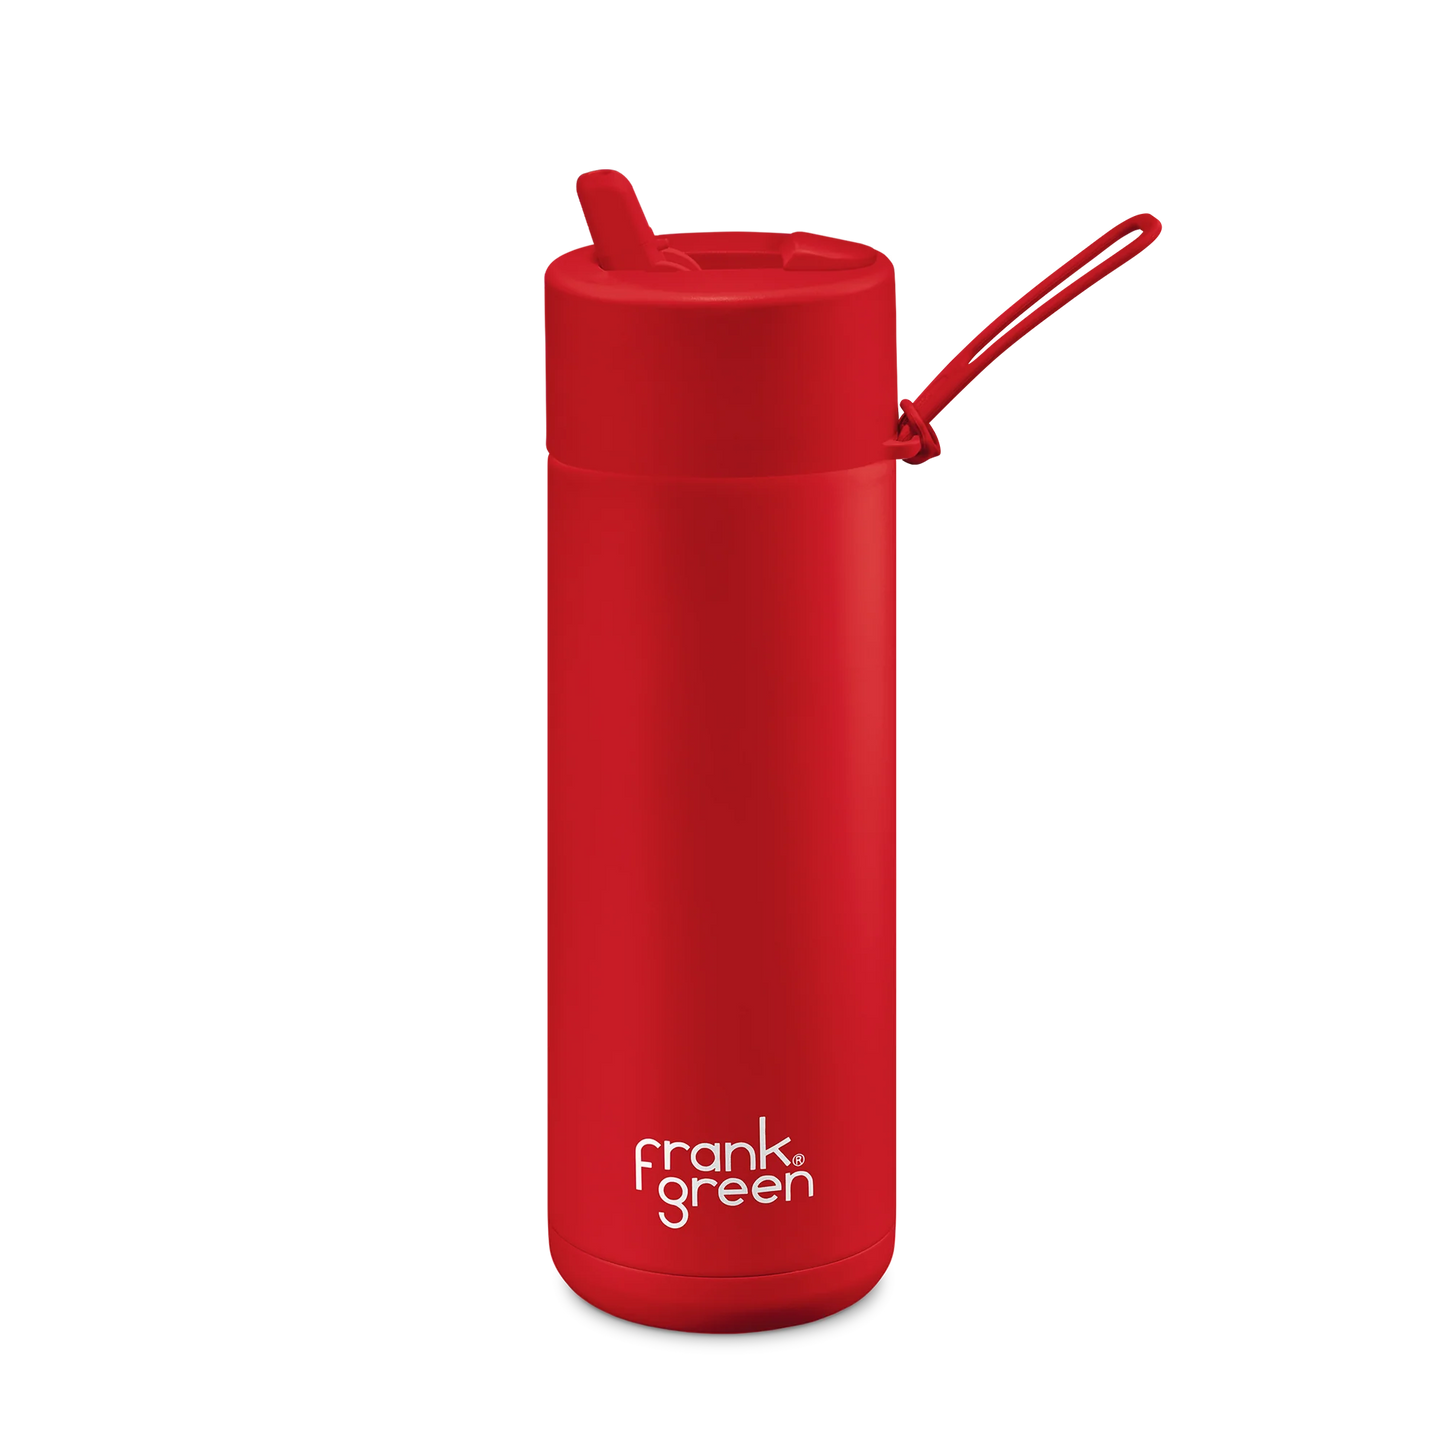 LIMITED EDITION FRANK GREEN CERAMIC REUSABLE BOTTLE (595ML) - ATOMIC RED